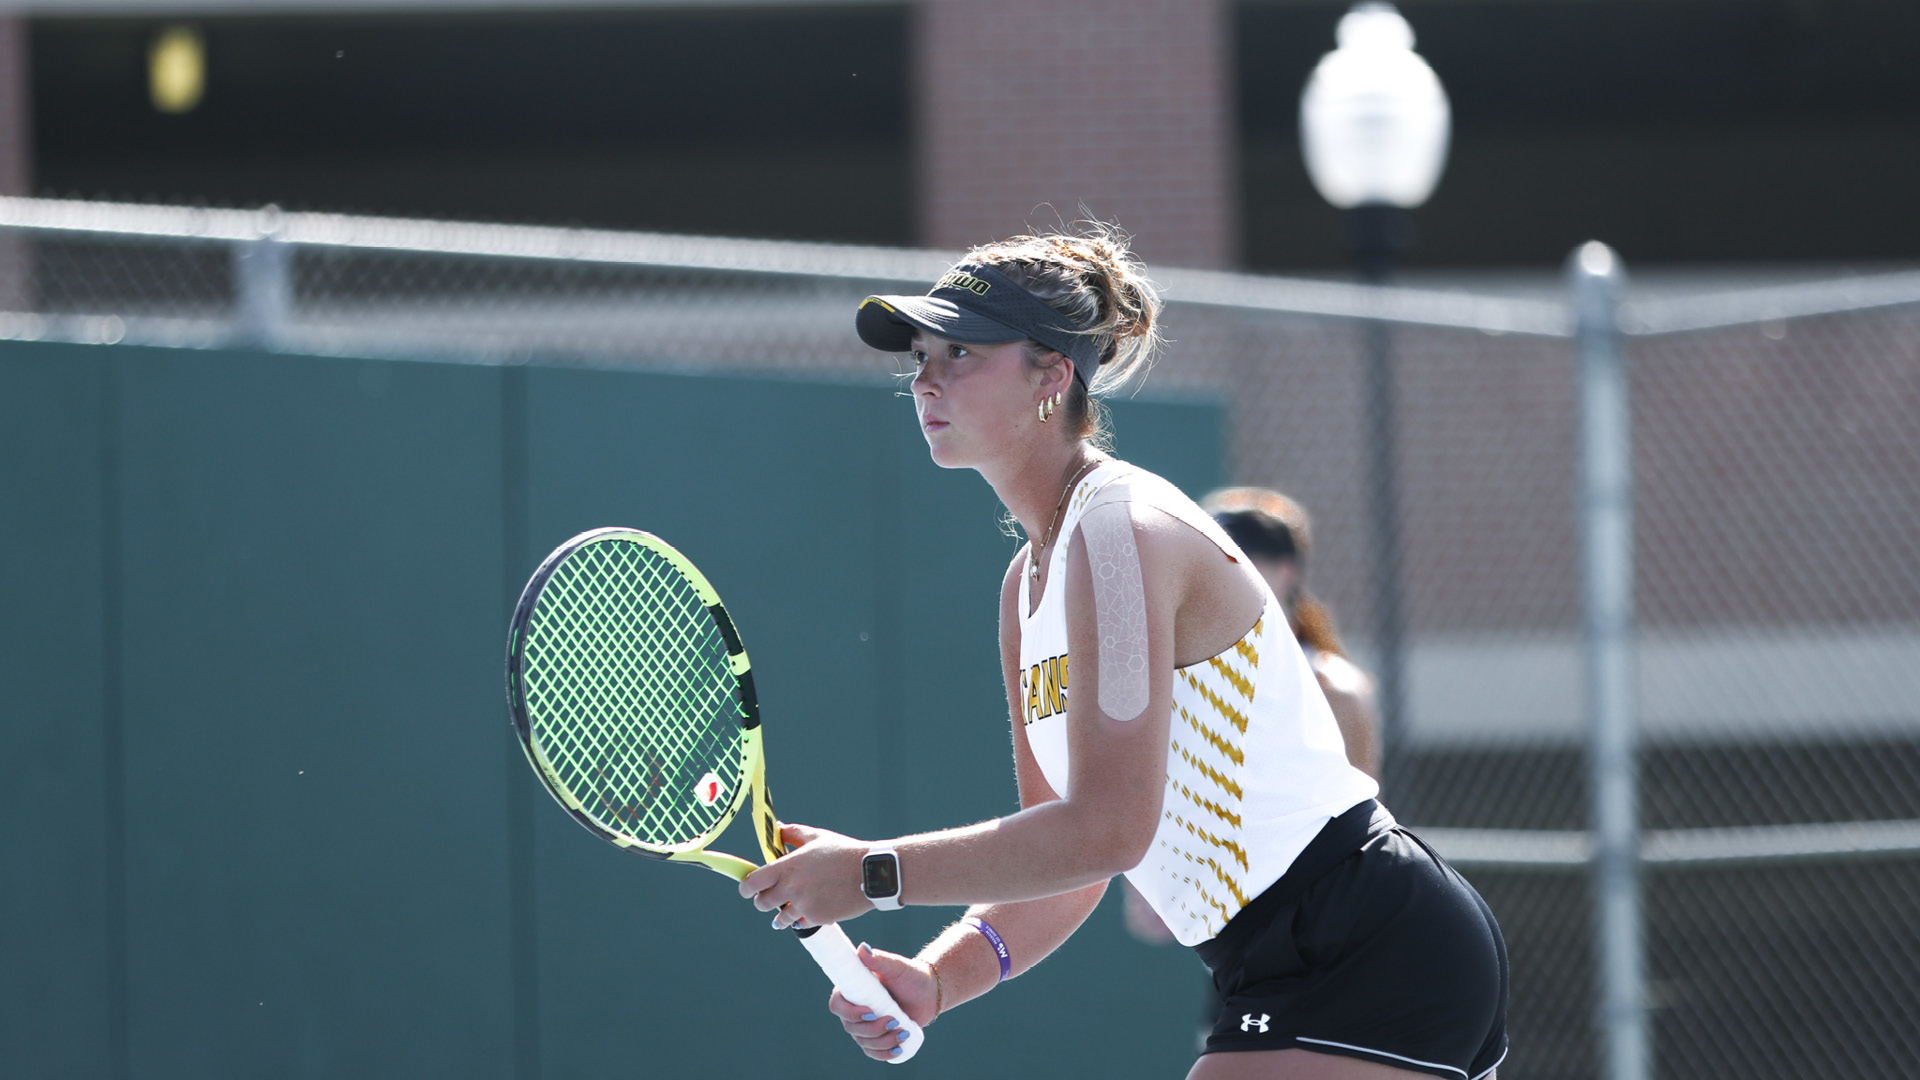 Jameson Gregory blanked her opponent in the No. 4 singles 6-0, 6-0